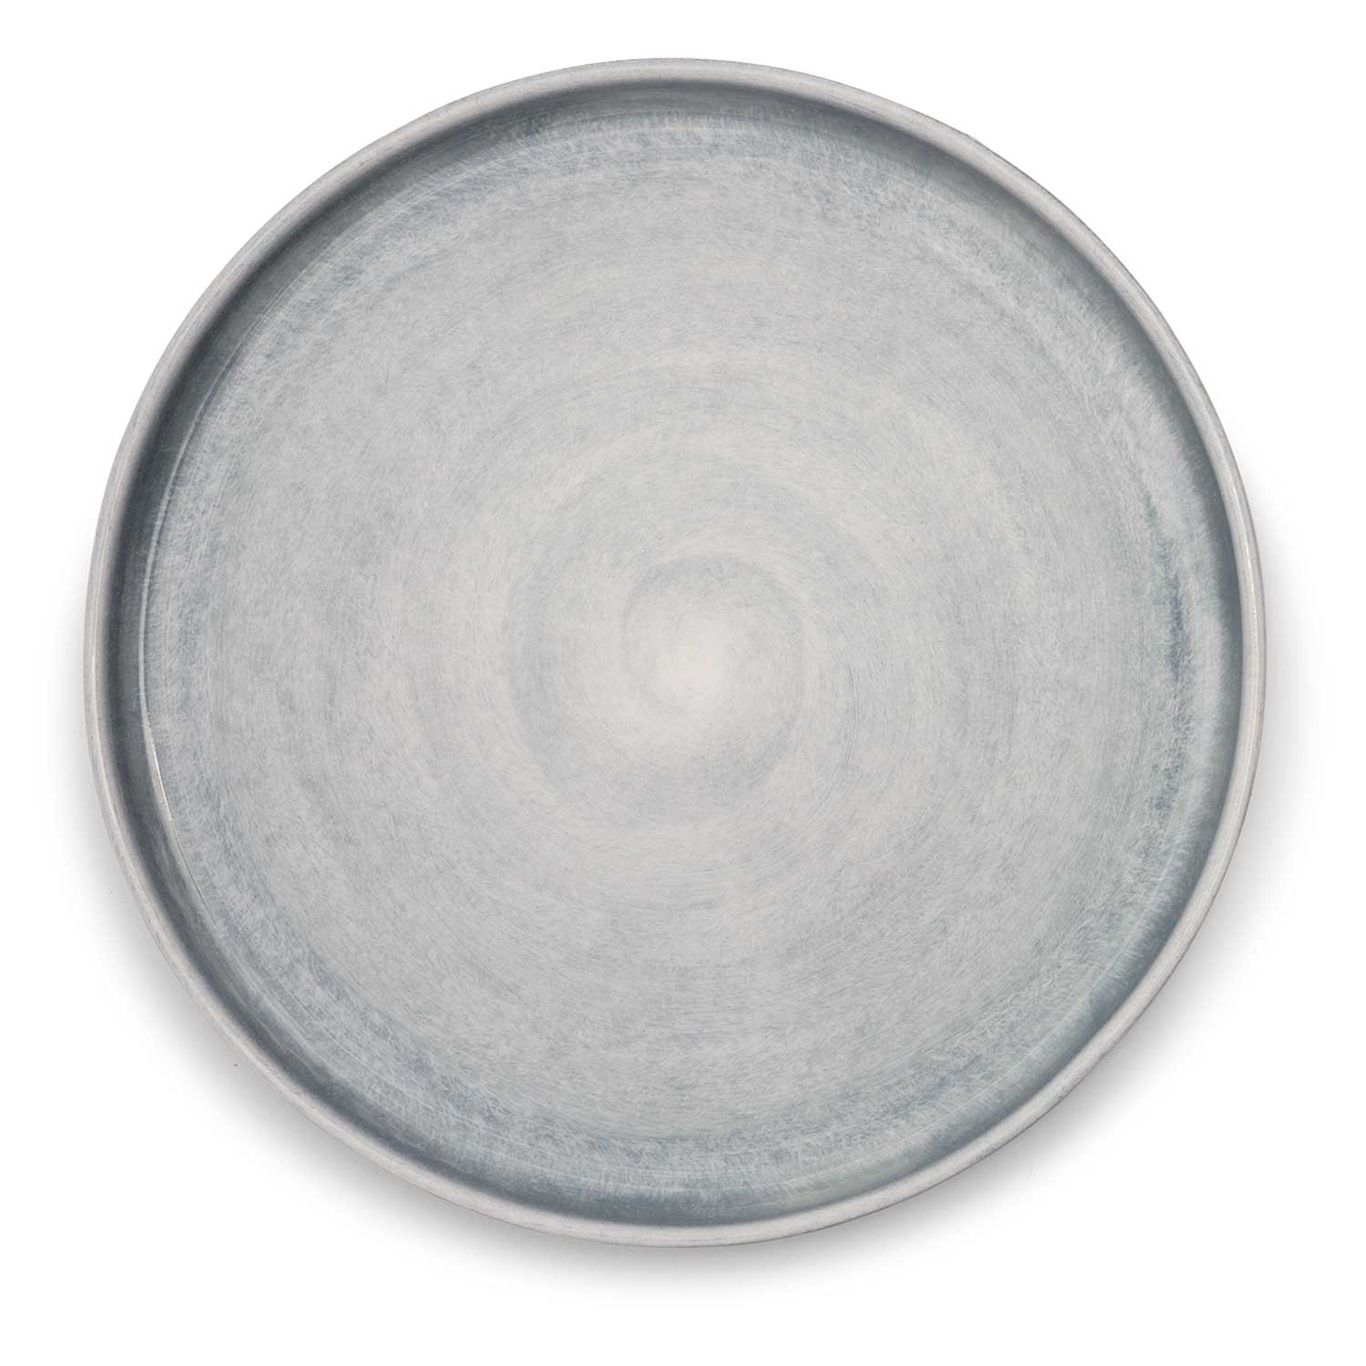 MSY Plate 13 cm, Icy Blue